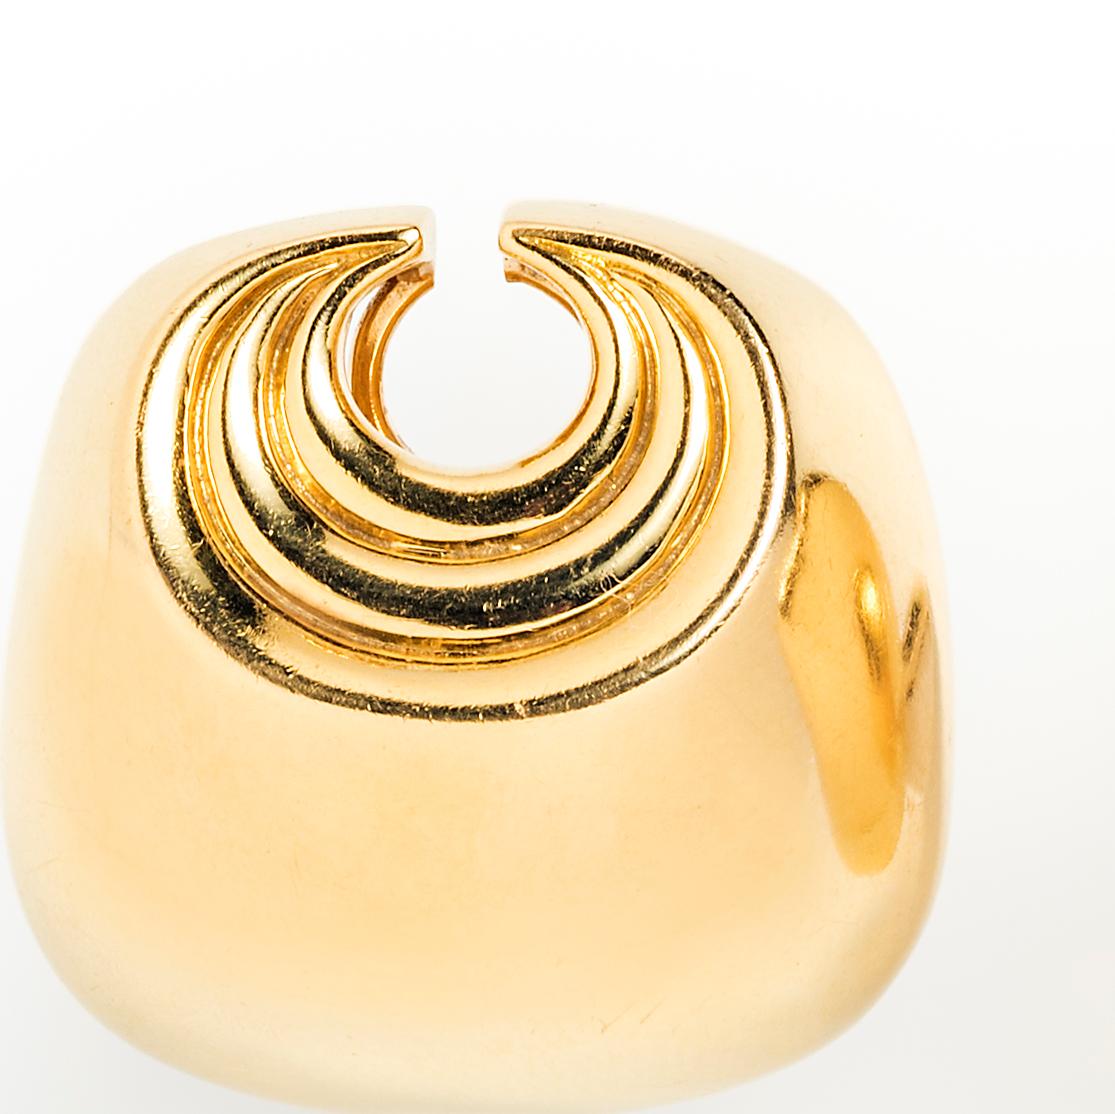 David Webb has crafted a refined pair of statement ear clips that are as easy for daytime wear as they are elegant for evening.  

Dimensions: 1 1/8” x 1 1/8” or 2.8 cm x 2.8 cm
Gross weight: 29.10 grams
18k yellow gold 
Signed Webb 18K 